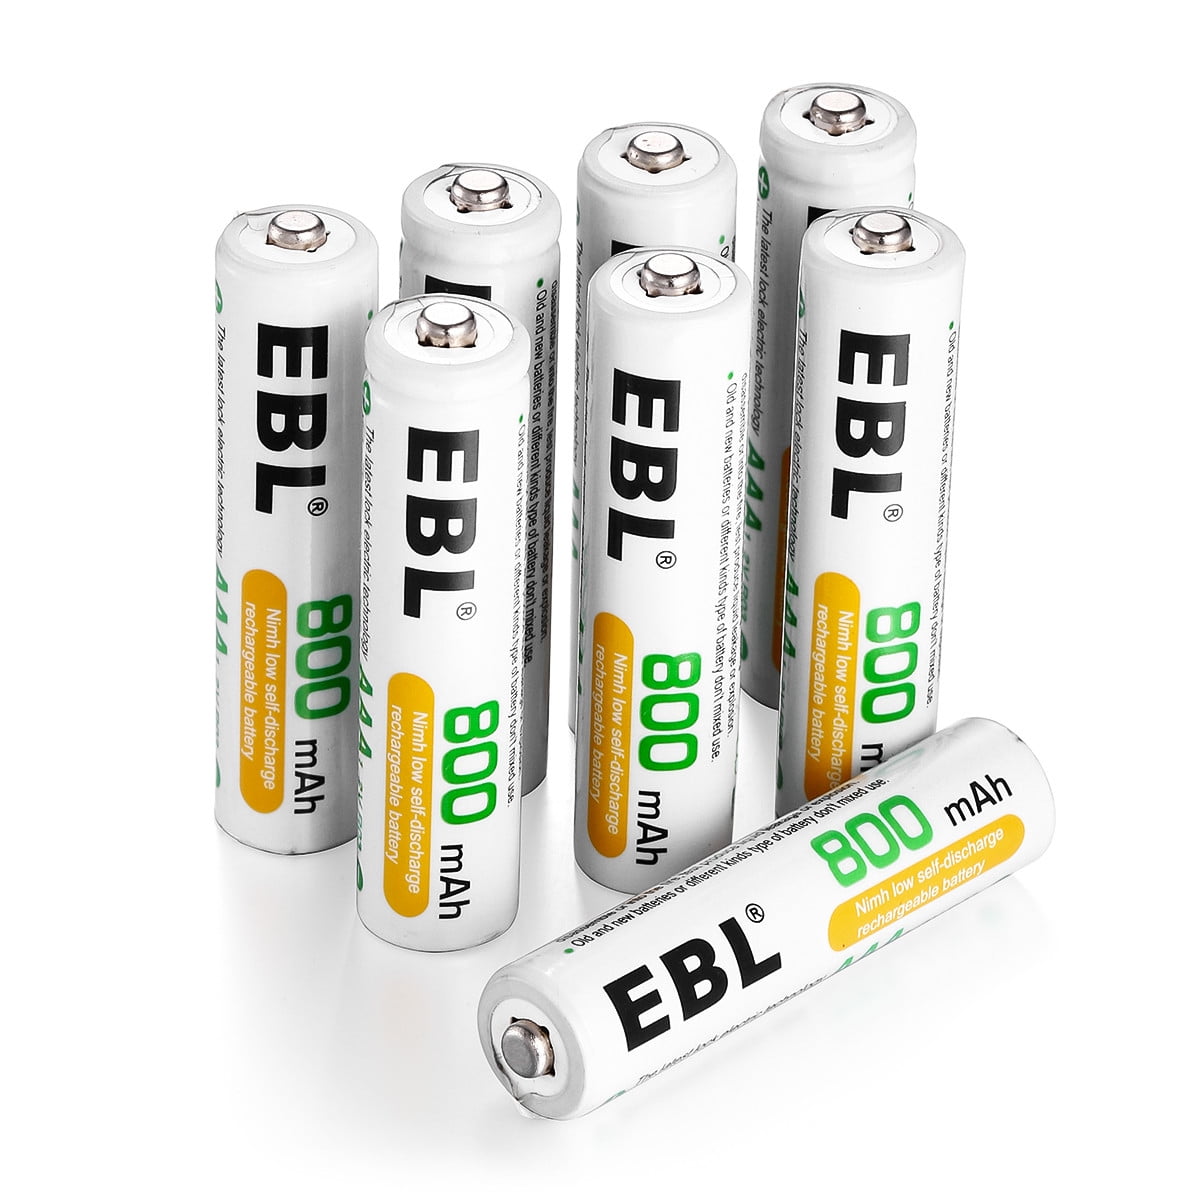 8-Pack 1.2v AAA Battery 800mAh Ni-MH Rechargeable Batteries for Cordless Phone Toys - Walmart.com